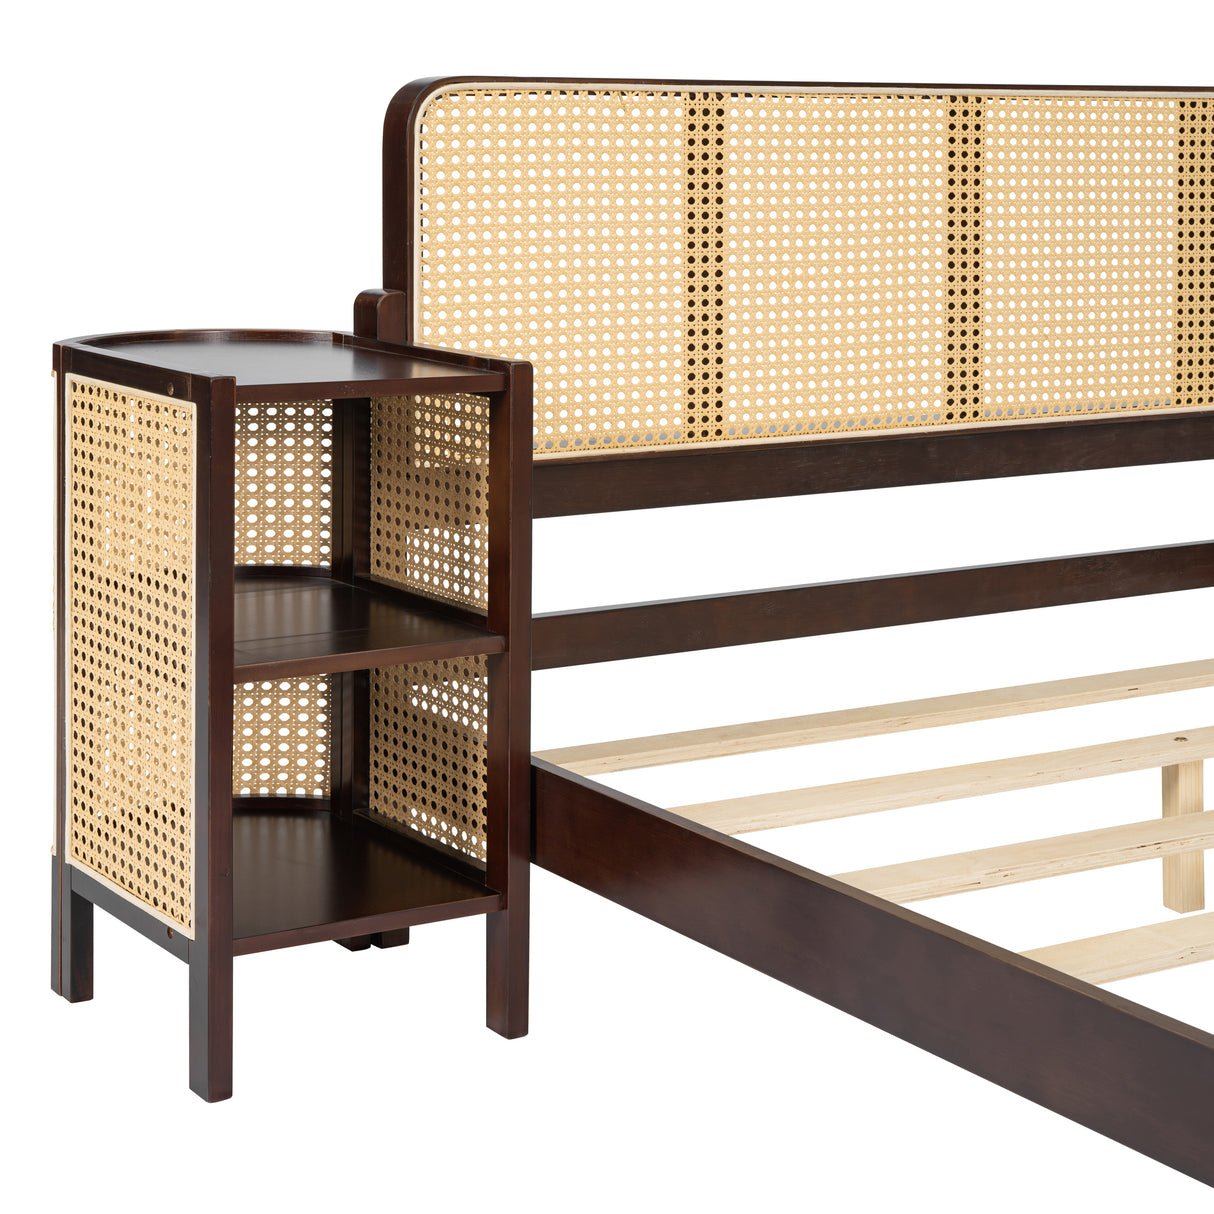 3 Pieces Rattan Platform Full Size Bed With 2 Nightstands,Walnut - Home Elegance USA